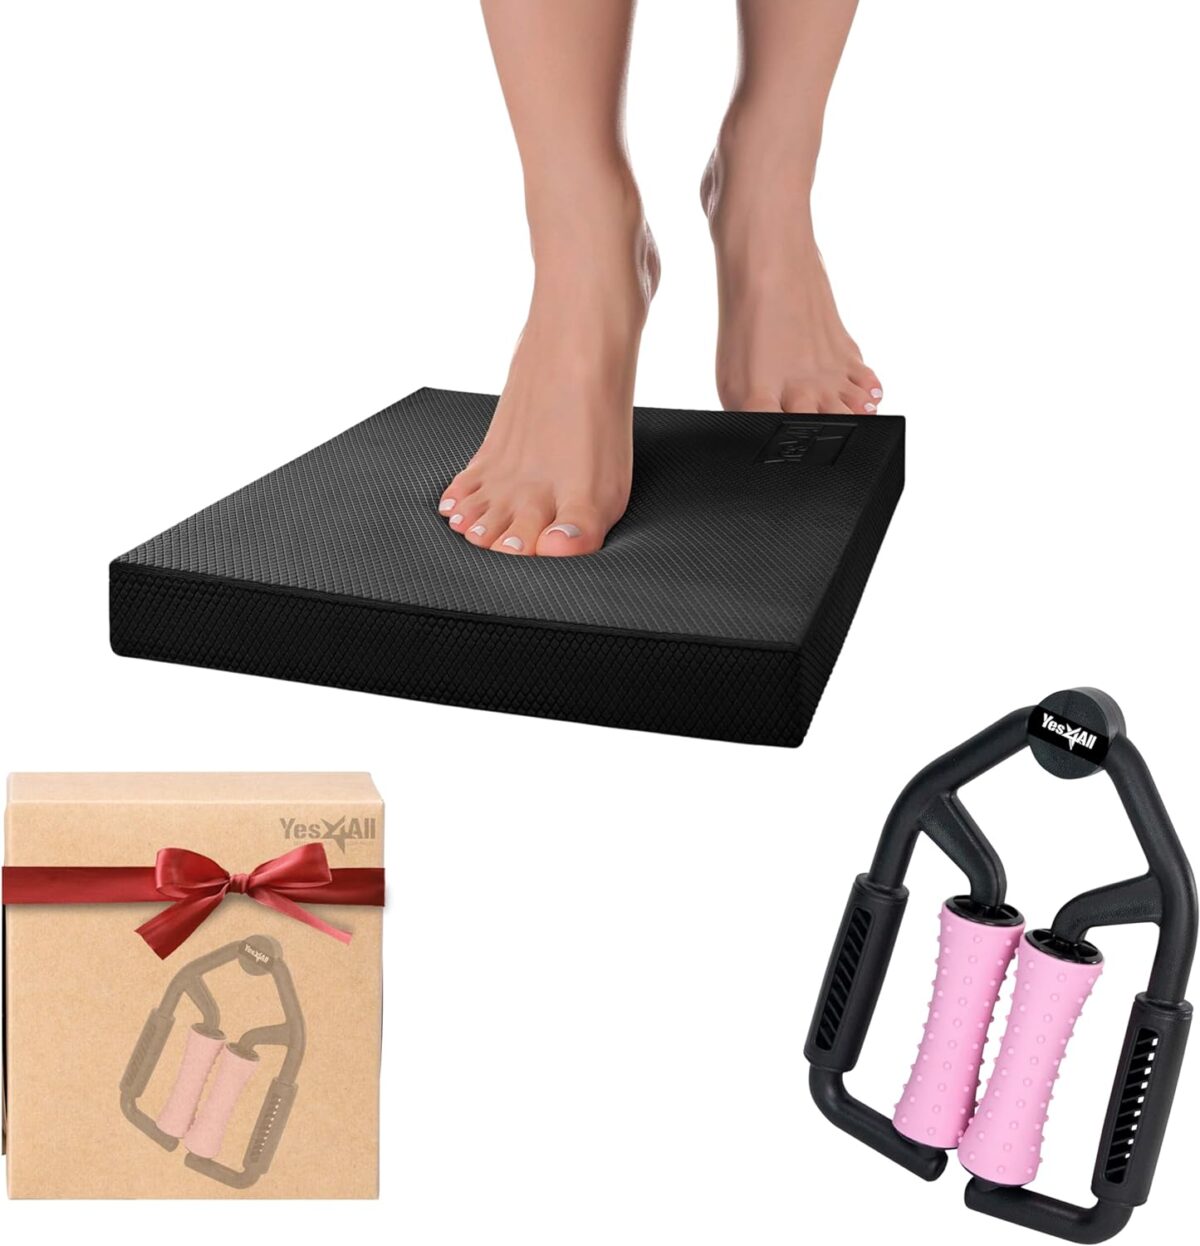 Featured Image for Yes4All Extra Large Foam Balance Pad, Non-Slip Foam Mat for Yoga & Balance Strength Training, Knee Pad for Physical Therapy